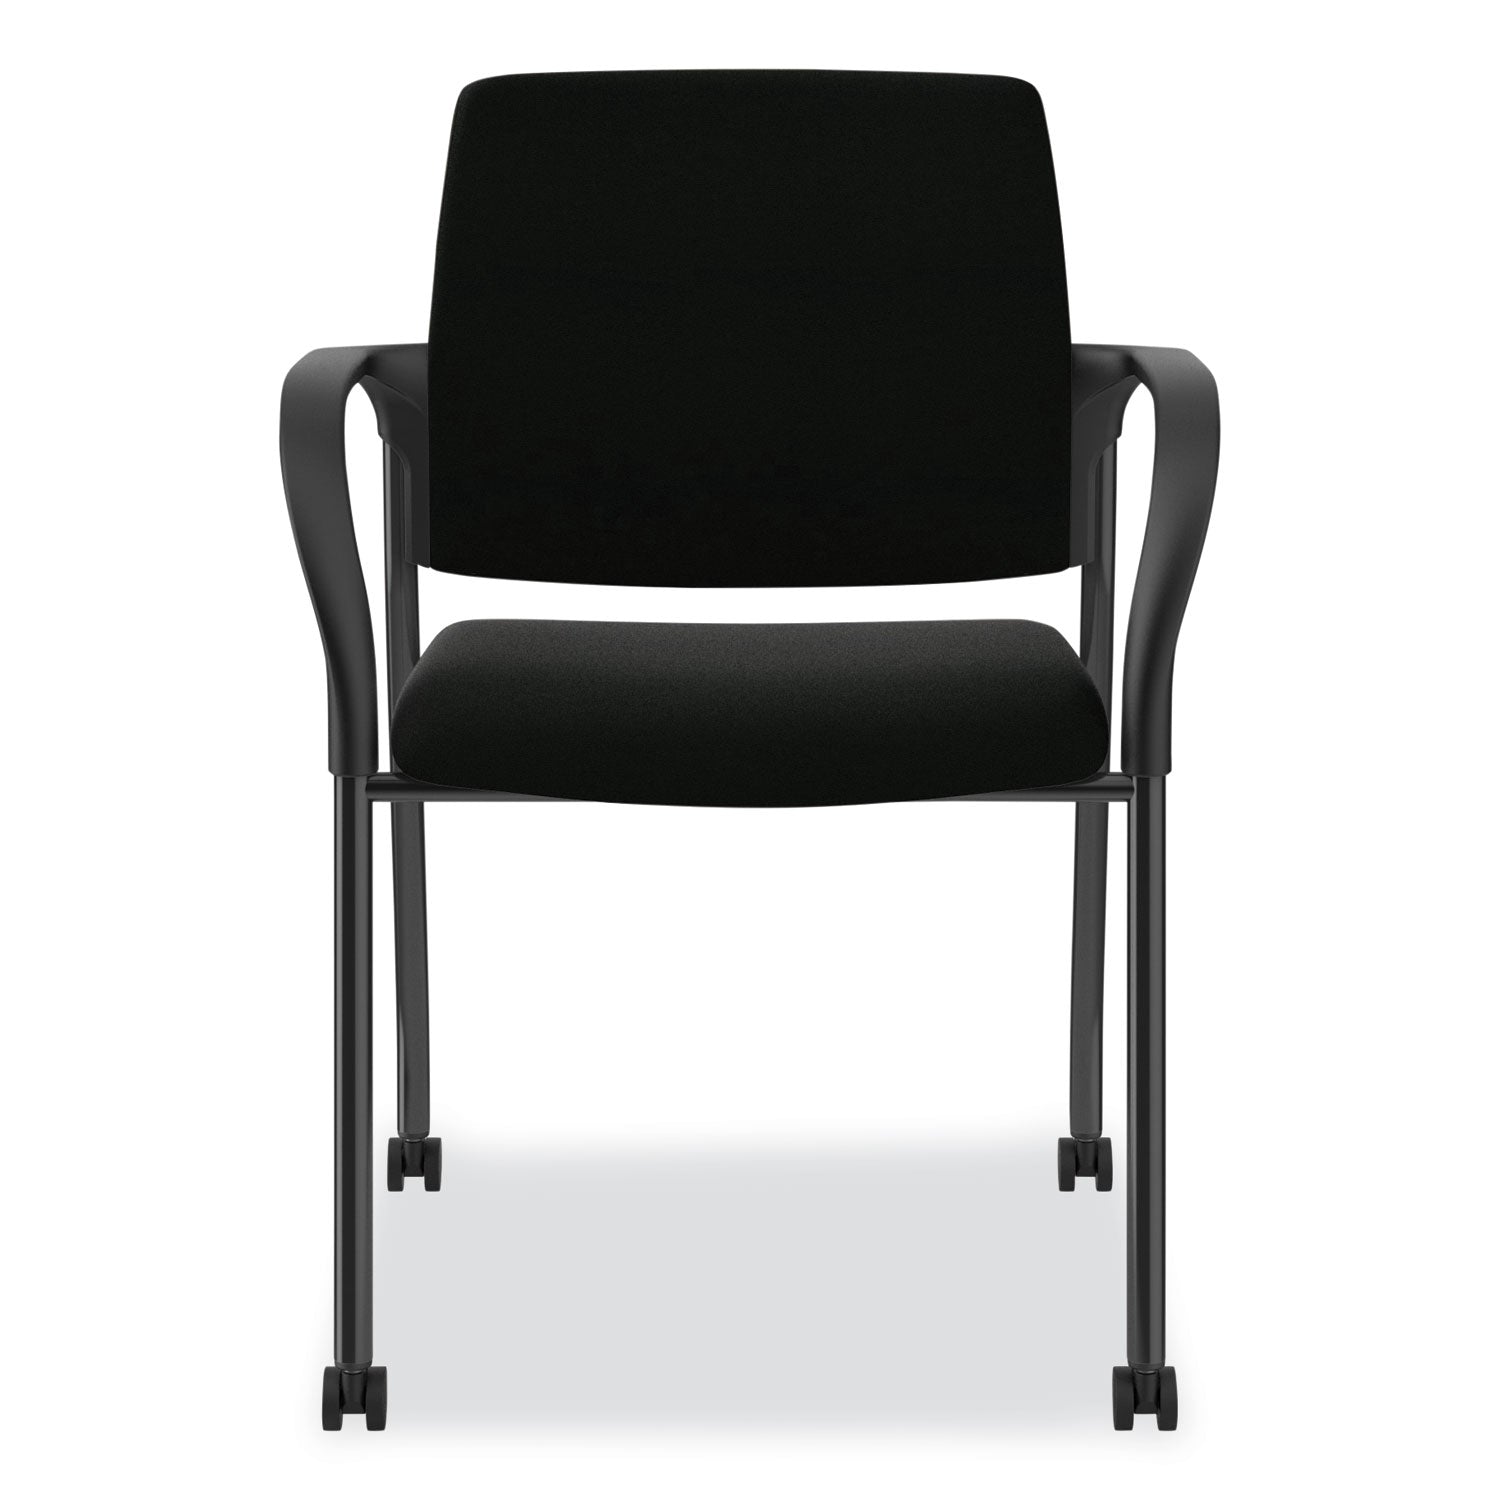 ignition-series-guest-chair-with-arms-polyurethane-fabric-seat-25-x-2175-x-335-black-ships-in-7-10-business-days_honis109hur10 - 4